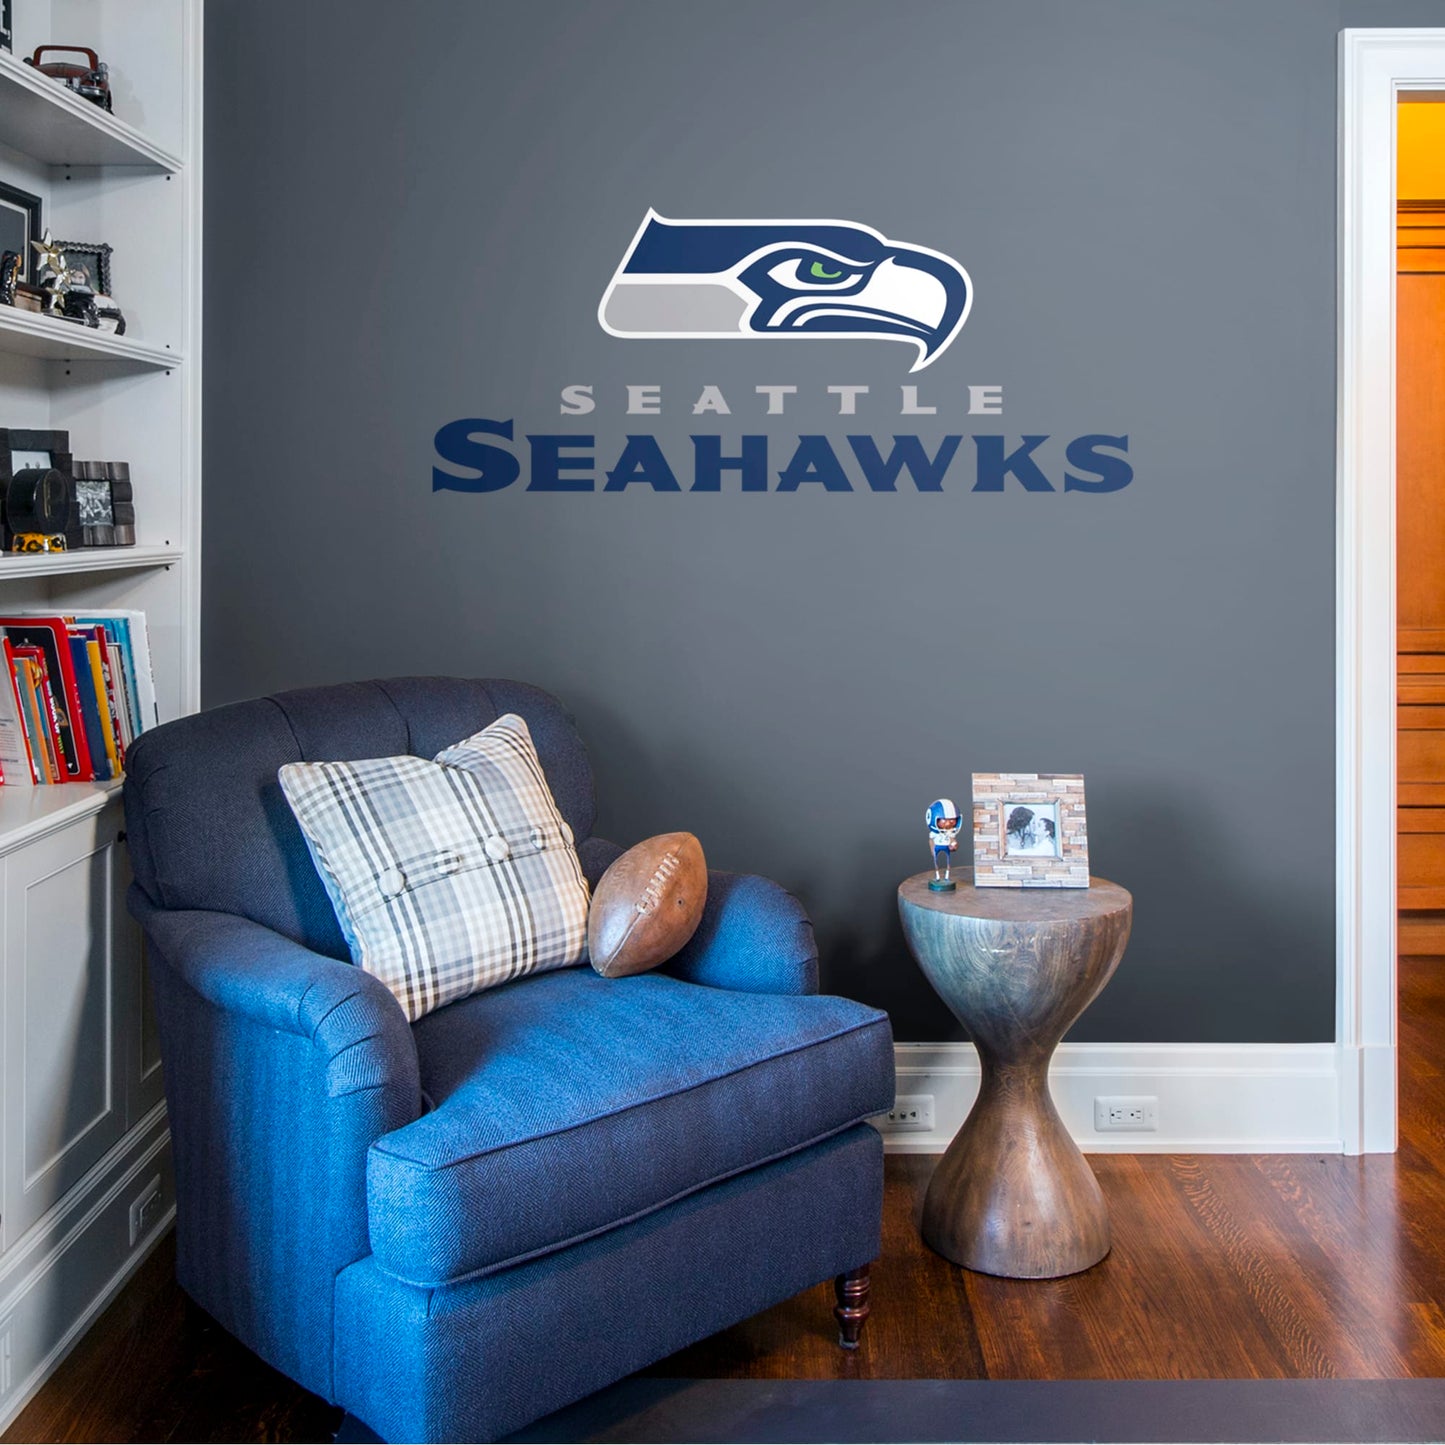 Seattle Seahawks: Logo - Officially Licensed NFL Transfer Decal